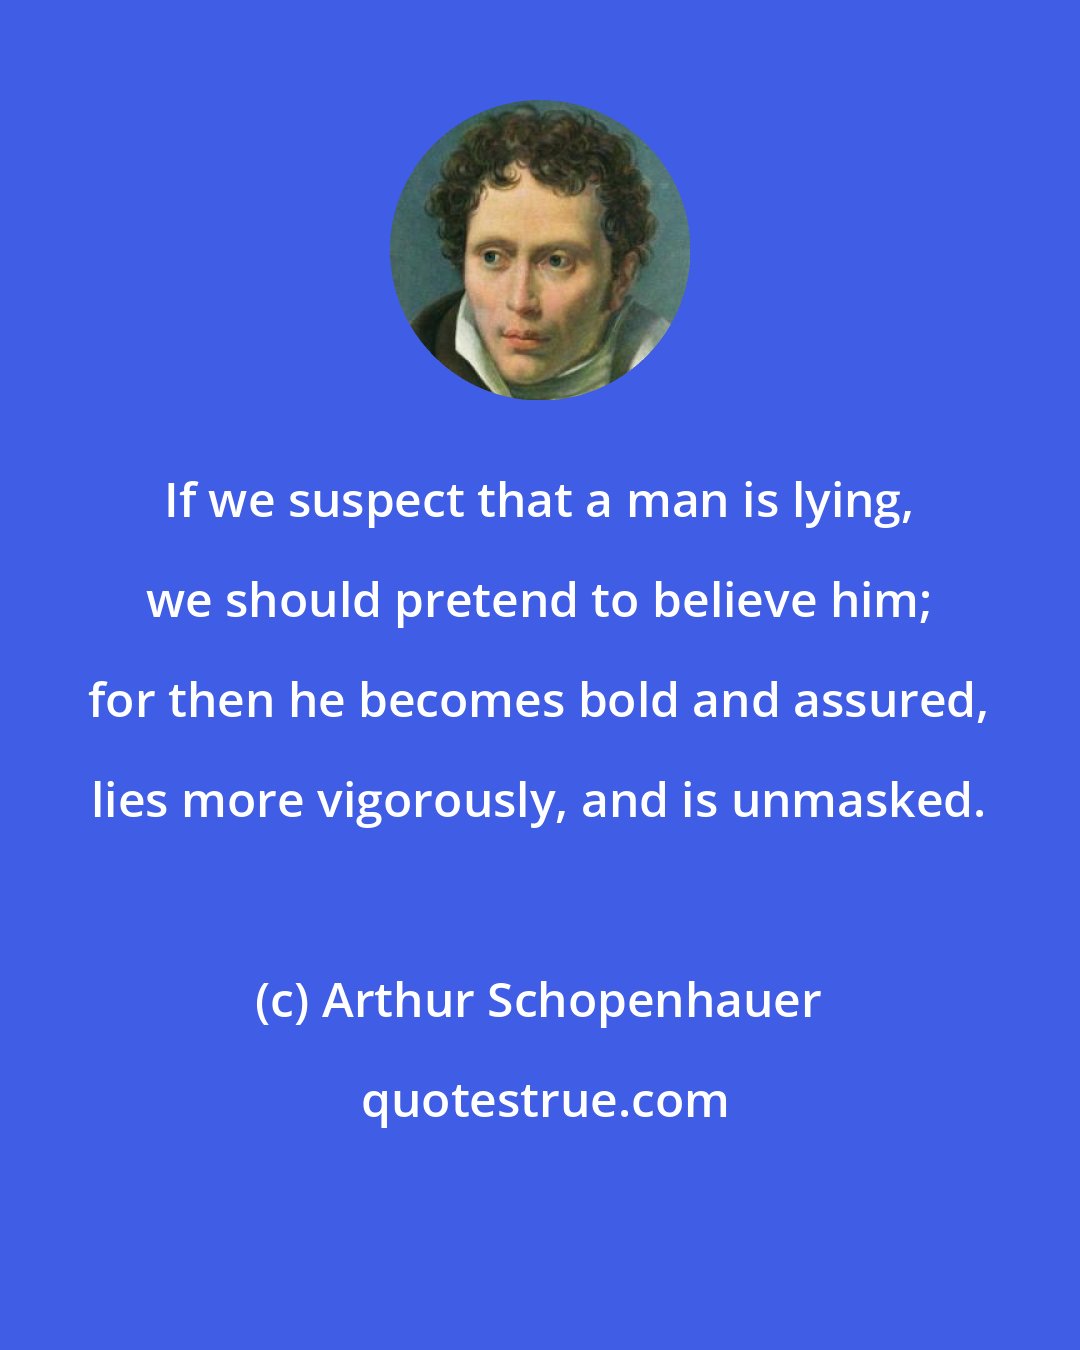 Arthur Schopenhauer: If we suspect that a man is lying, we should pretend to believe him; for then he becomes bold and assured, lies more vigorously, and is unmasked.